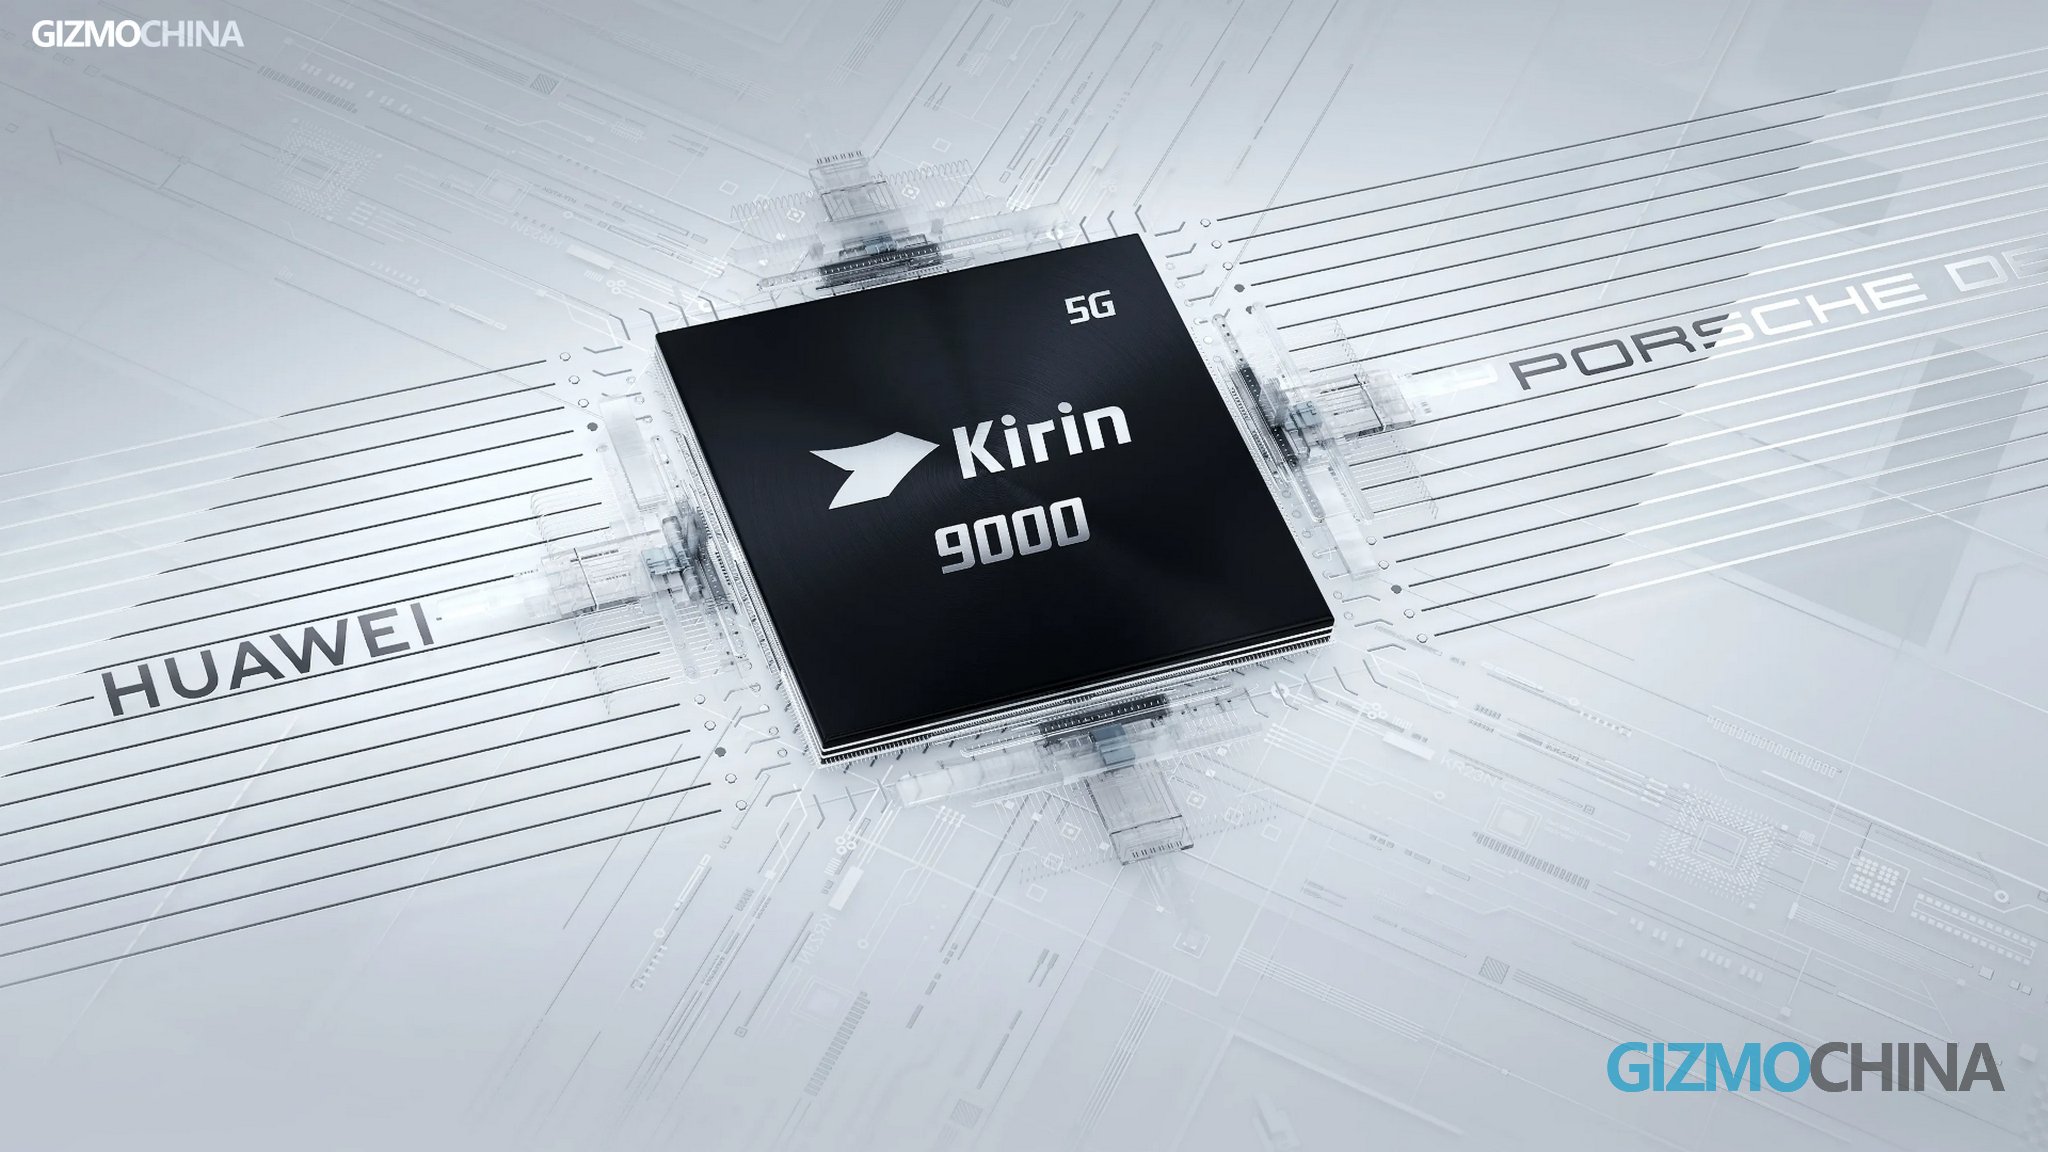 Huawei’s next flagship chipset to be called the Kirin 9010 and will be 3nm